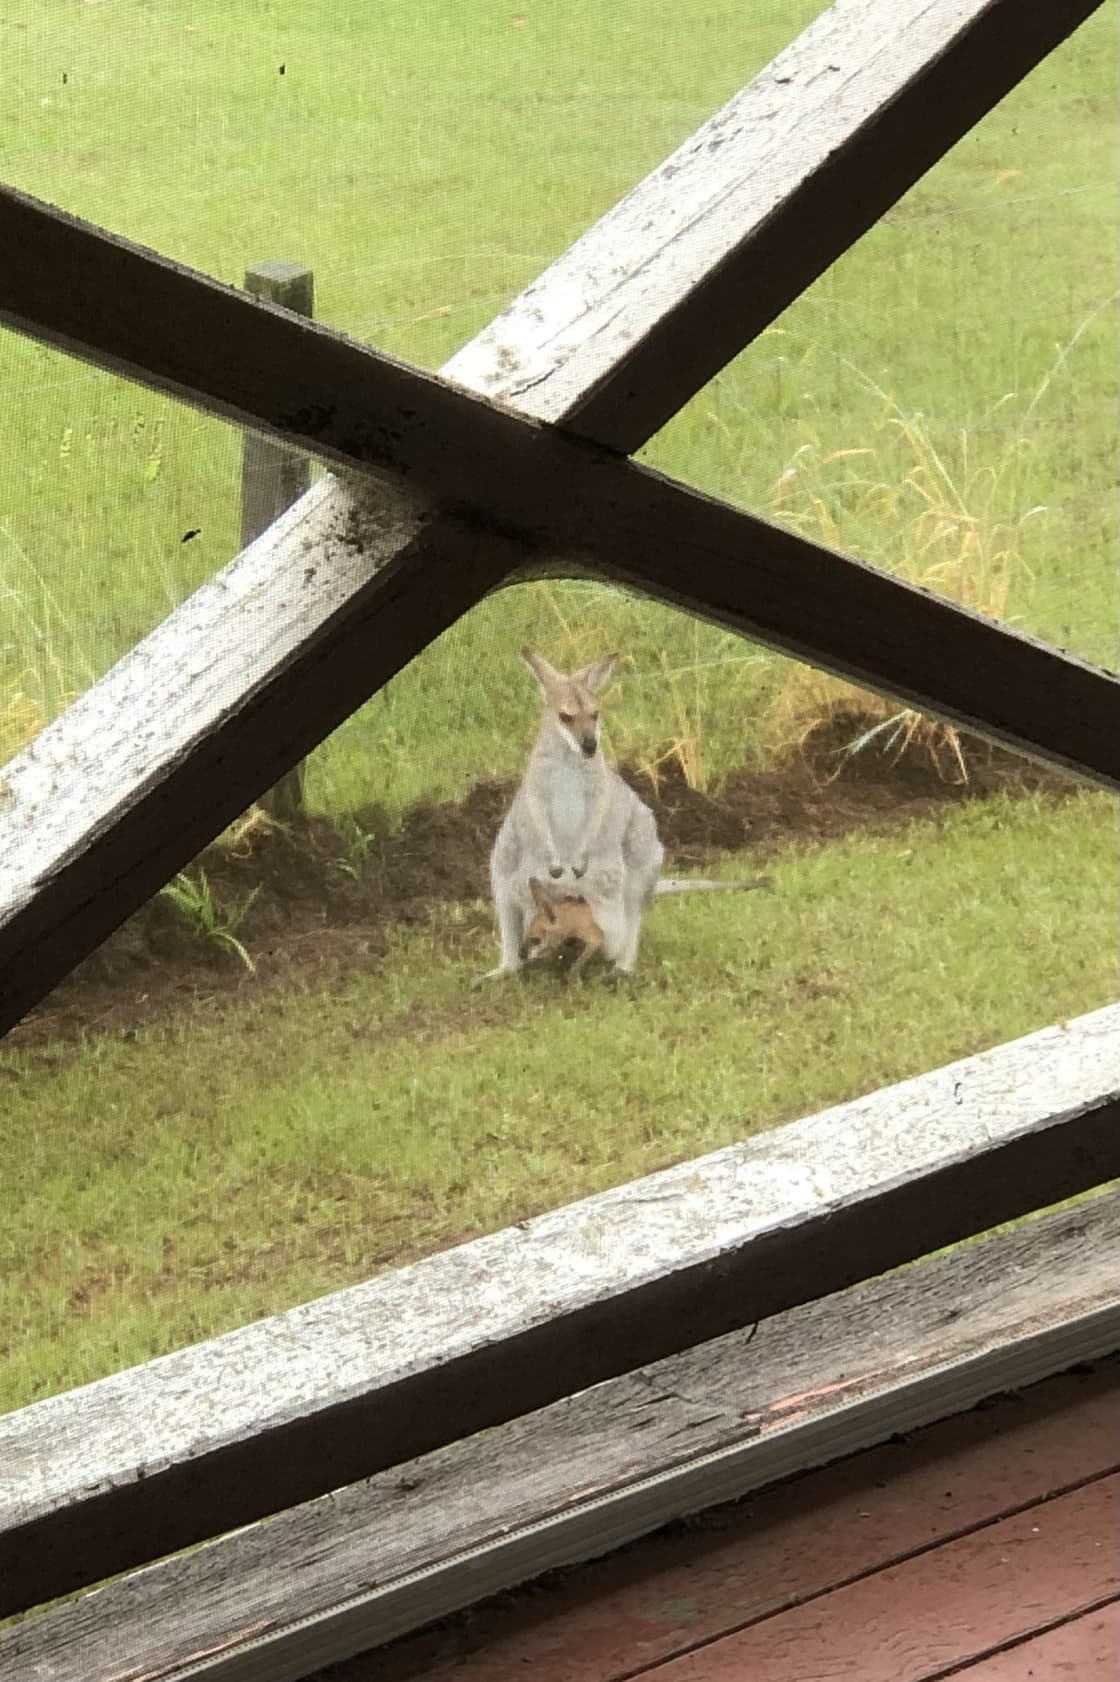 Pretty wallaby mumma and bubba in the house yard today….. they frequent the camp grounds as well. 

March 2023